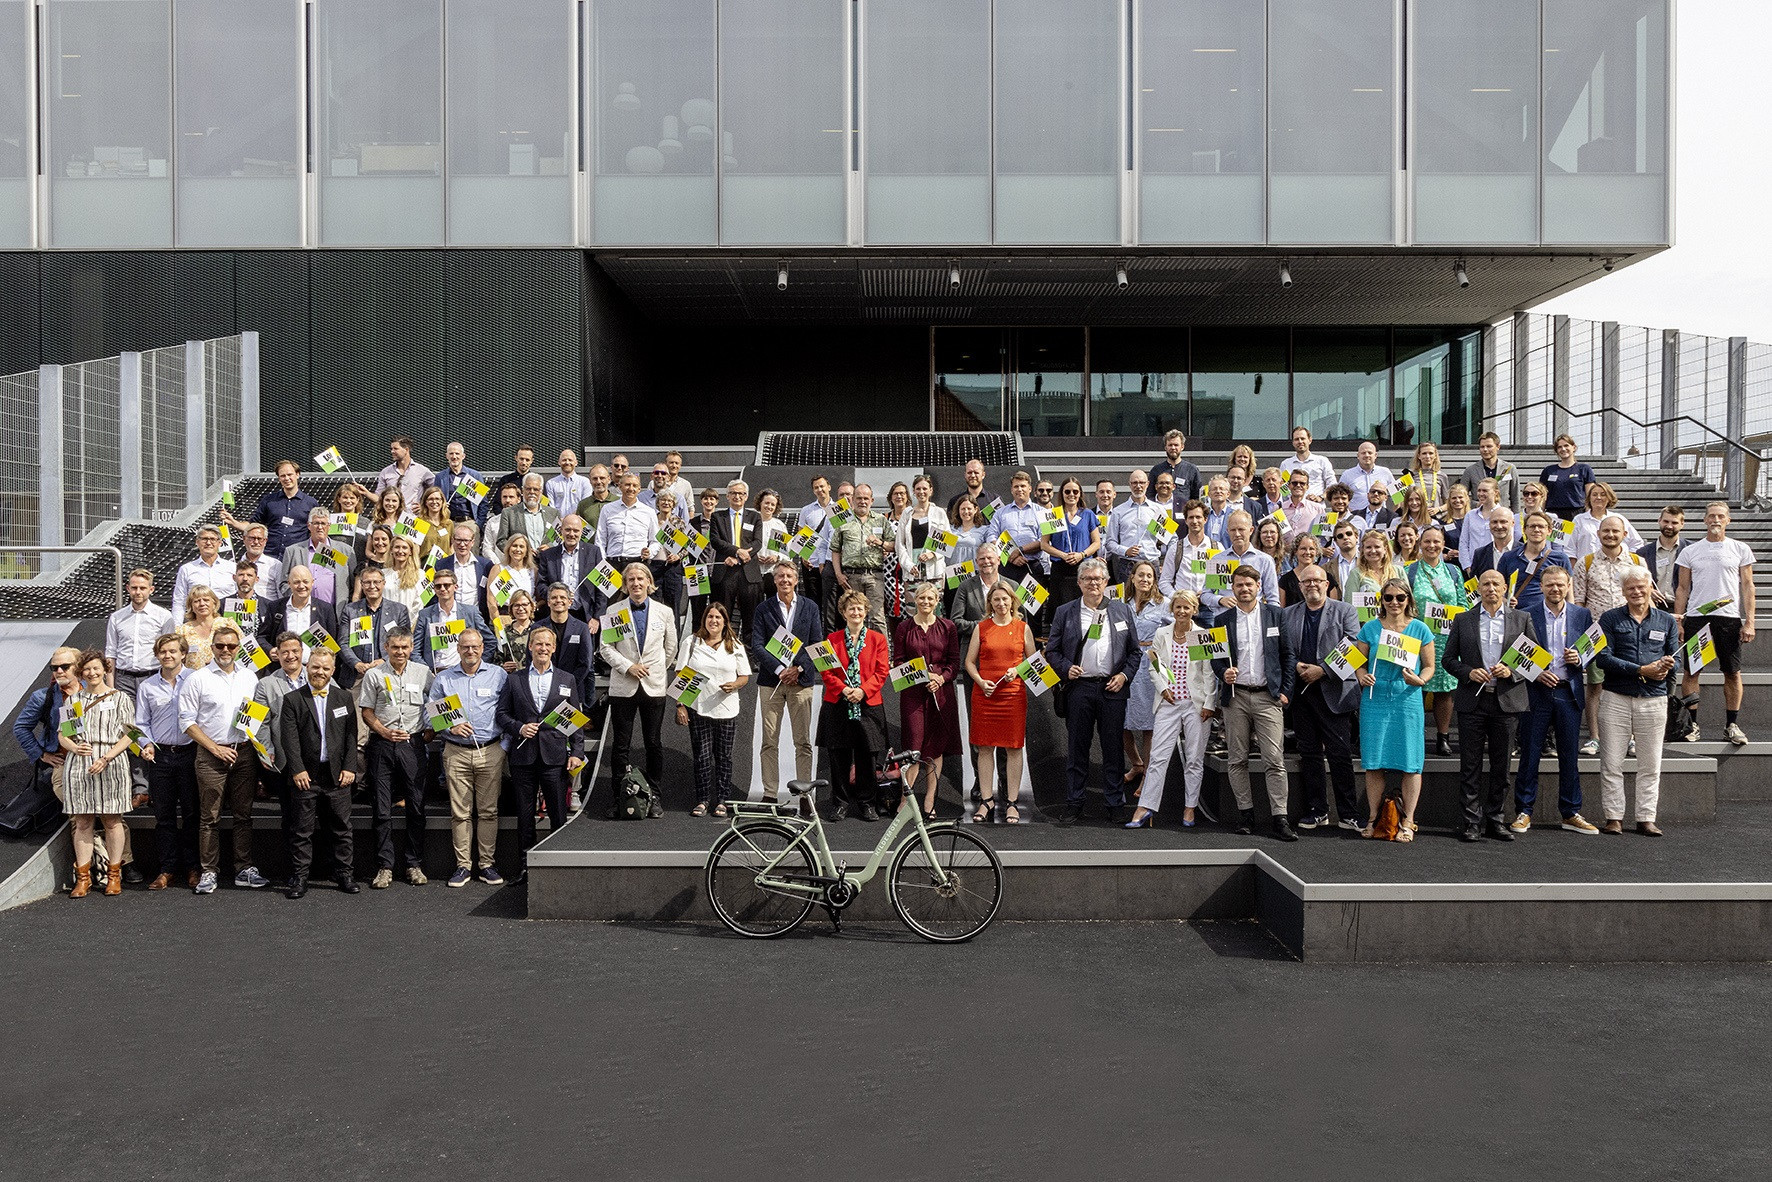 The City of Copenhagen joined 31 other partners in signing a declaration on increased cooperation to promote cycling in Denmark after seeing a fall in the number of cyclists ©City of Copenhagen